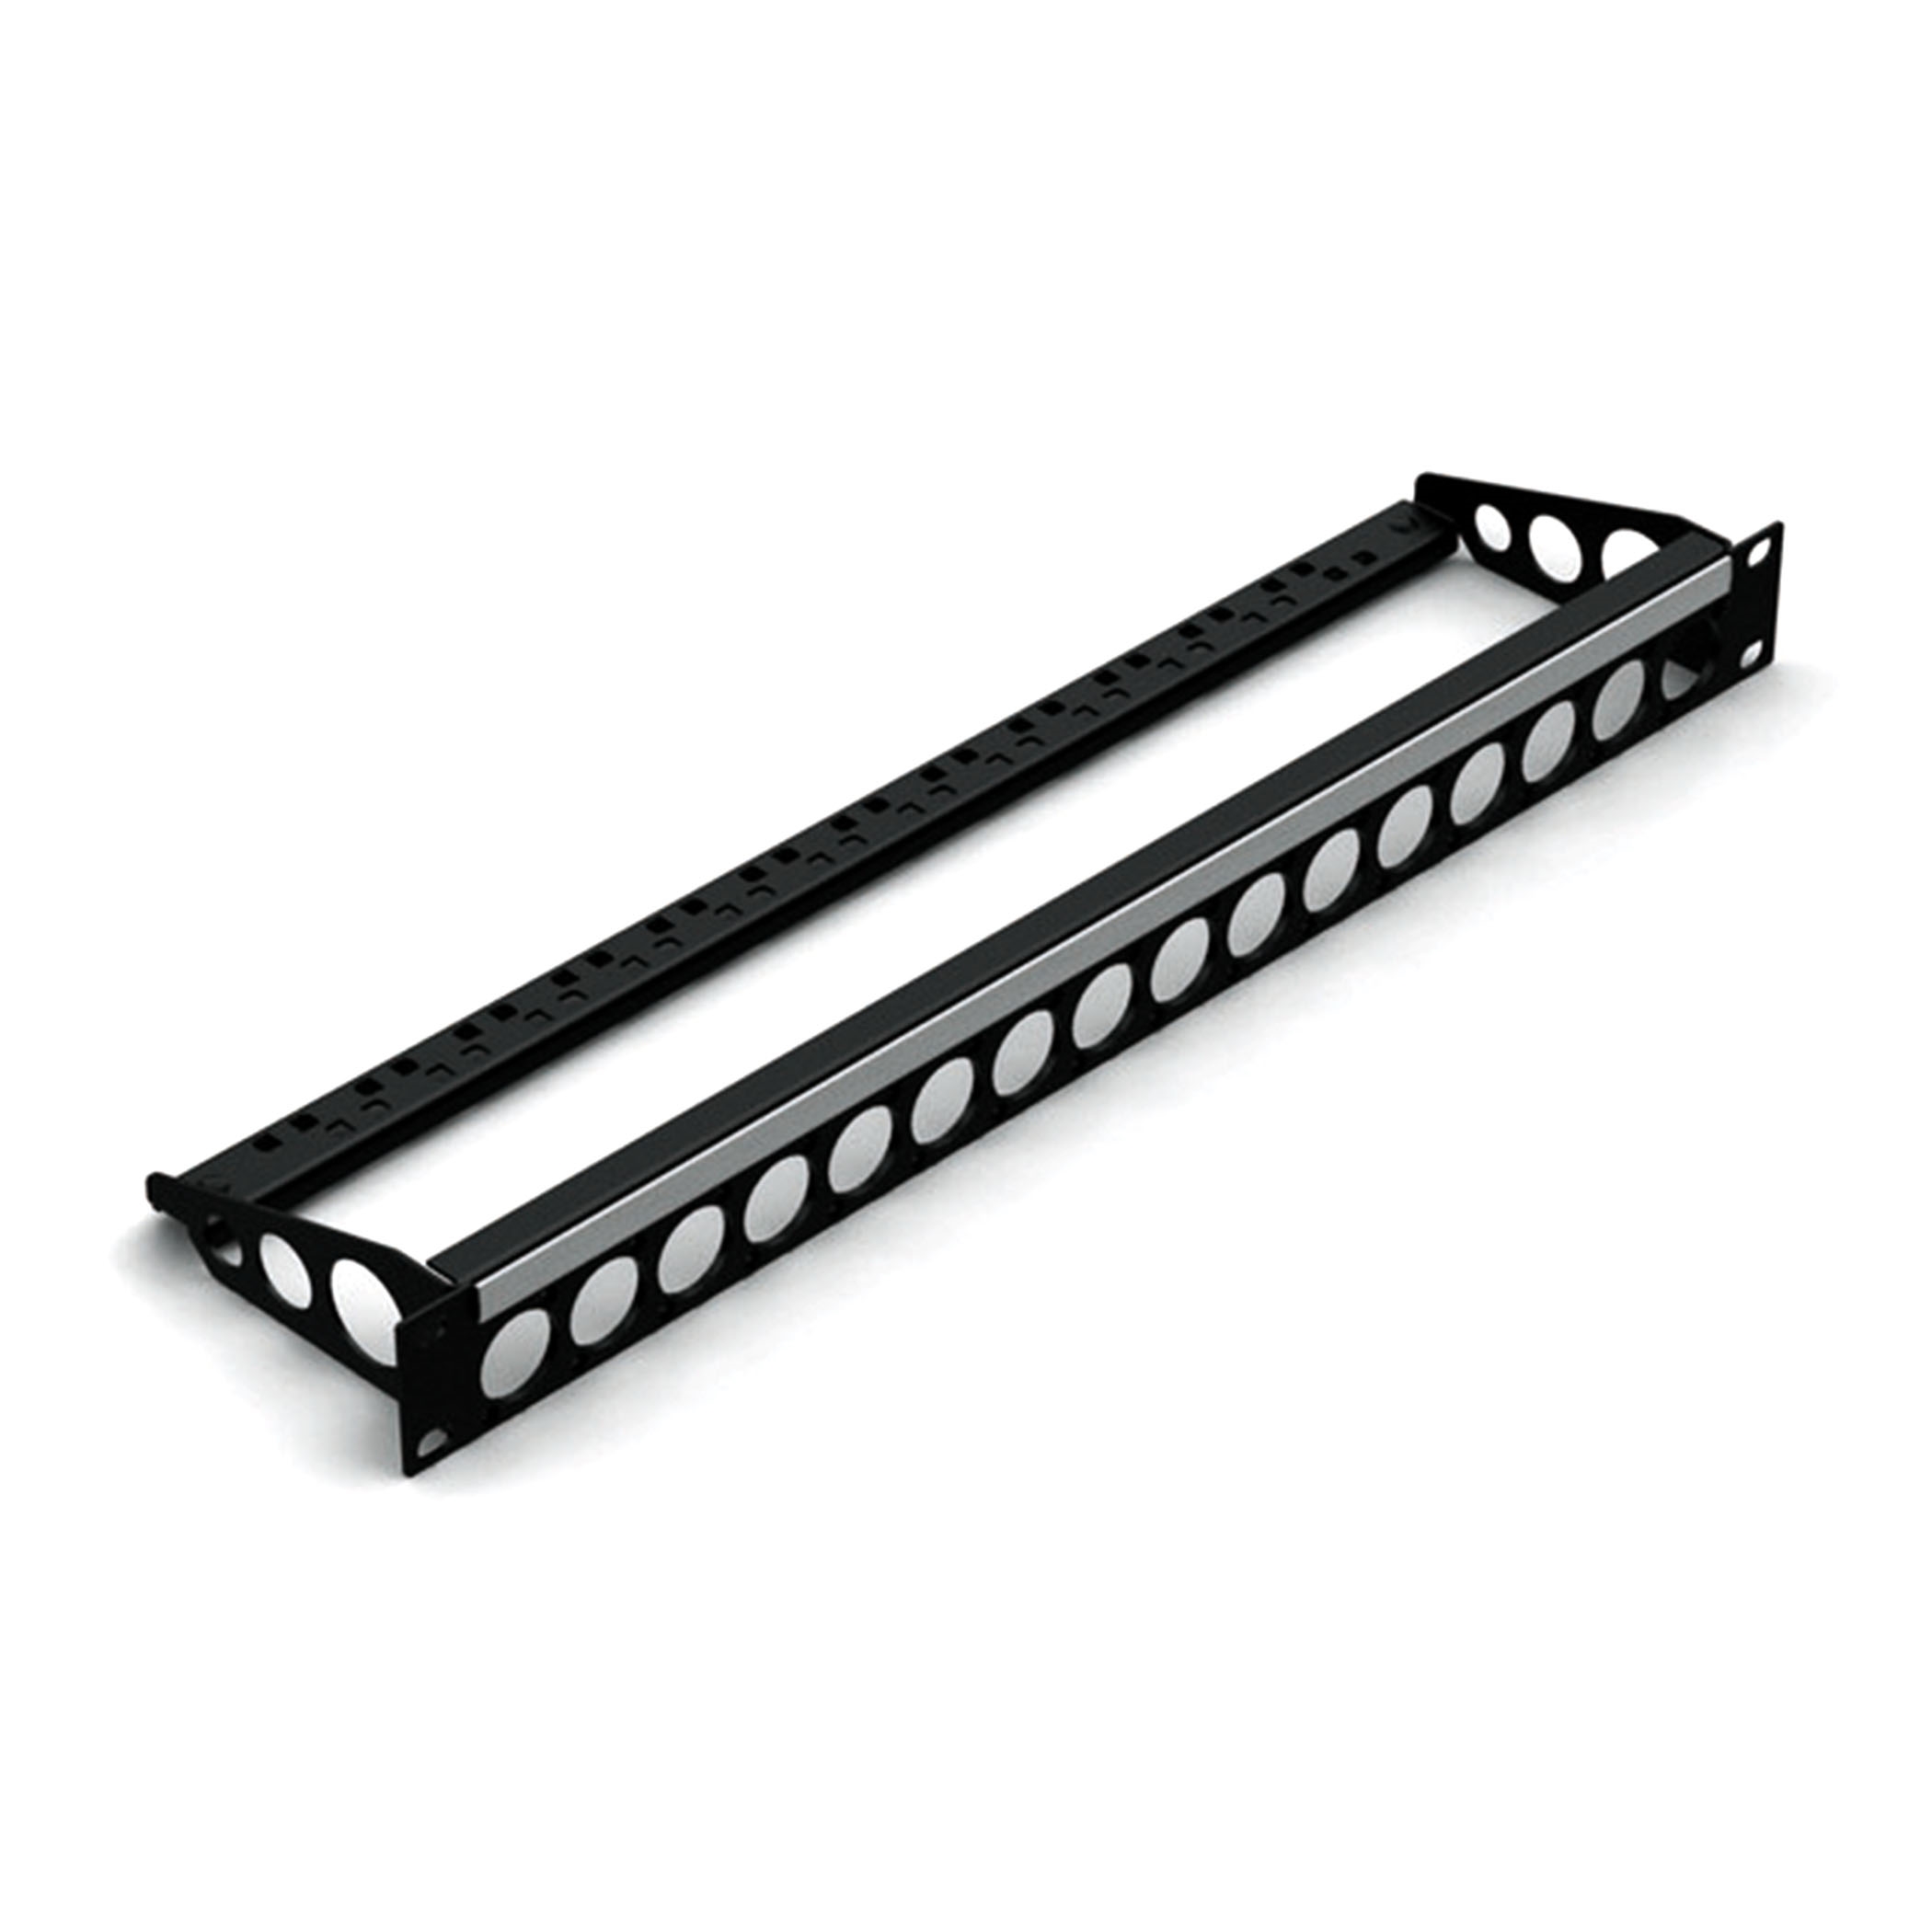 1U Rack Panel with cable support, ID-strip and 16x Neutrik D-type - r2269-1uk-16h